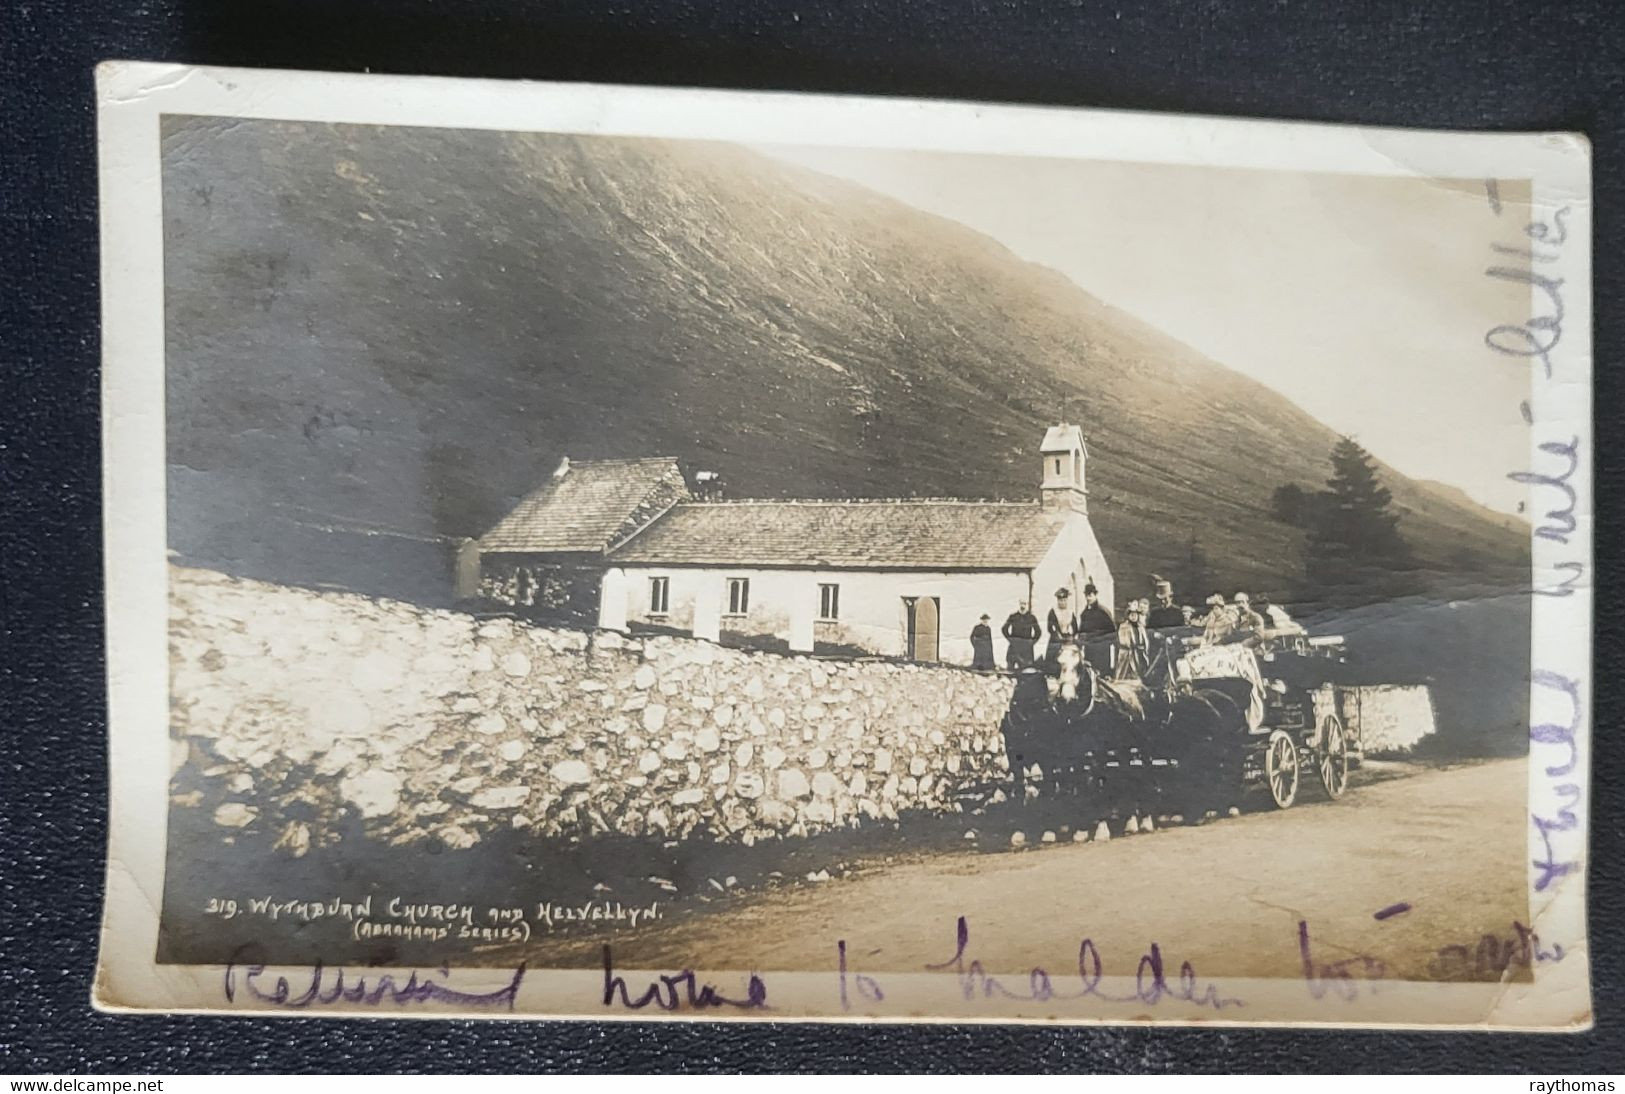 5 OLD PHOTO CARDS - LAKE DISTRICT - CHURCH AND ISLAND AT GRASSMERE, CHURCH AT HELVELLYN,  KESWICK TOWN CENTRE AND BOWNES